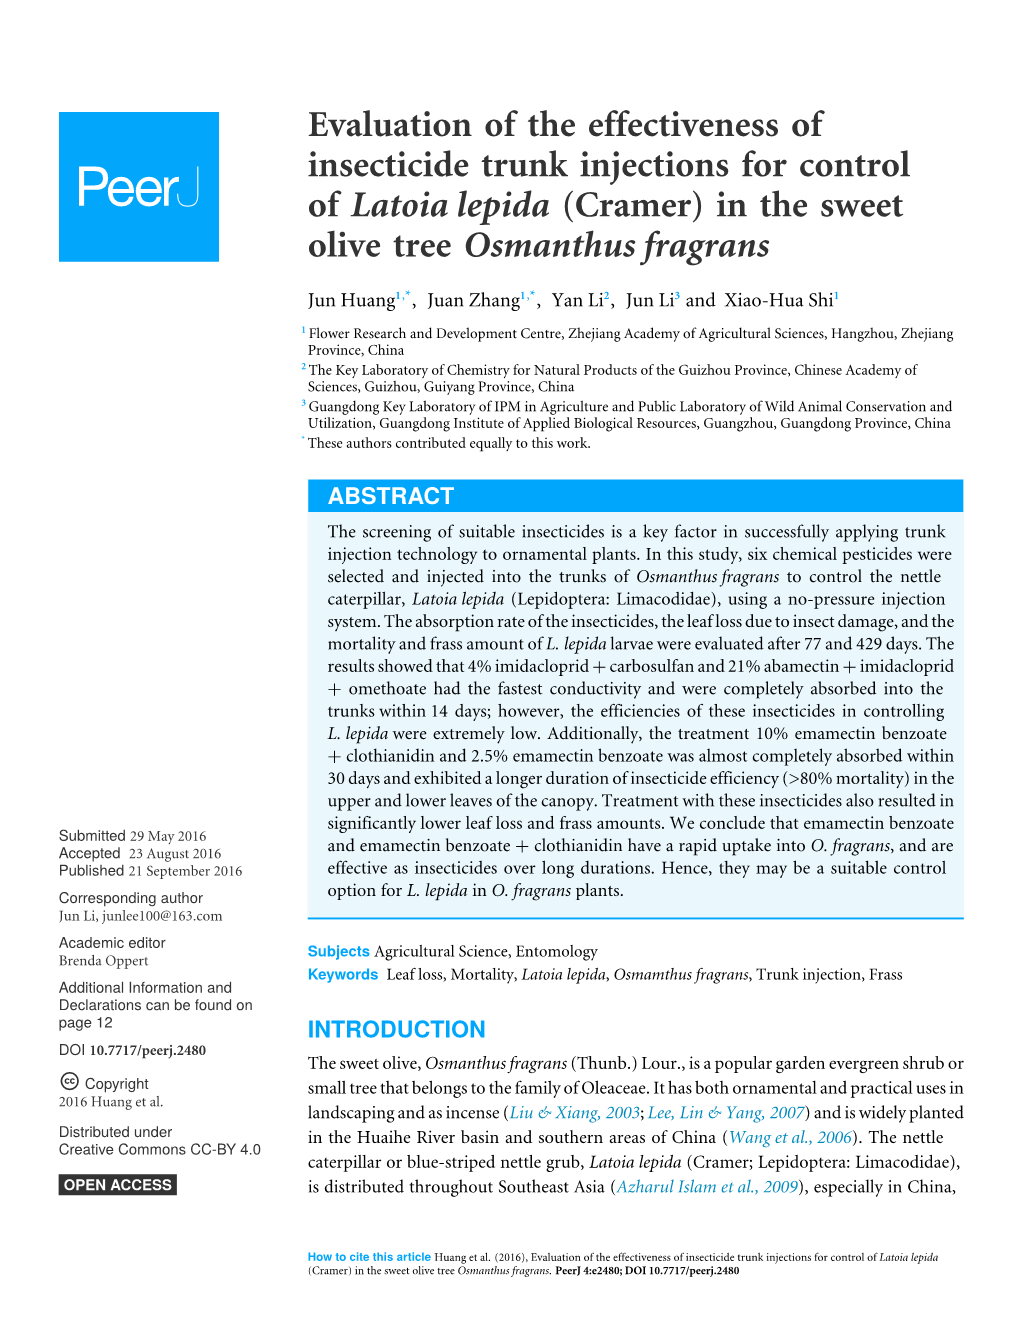 Evaluation of the Effectiveness of Insecticide Trunk Injections for Control of Latoia Lepida (Cramer) in the Sweet Olive Tree Osmanthus Fragrans